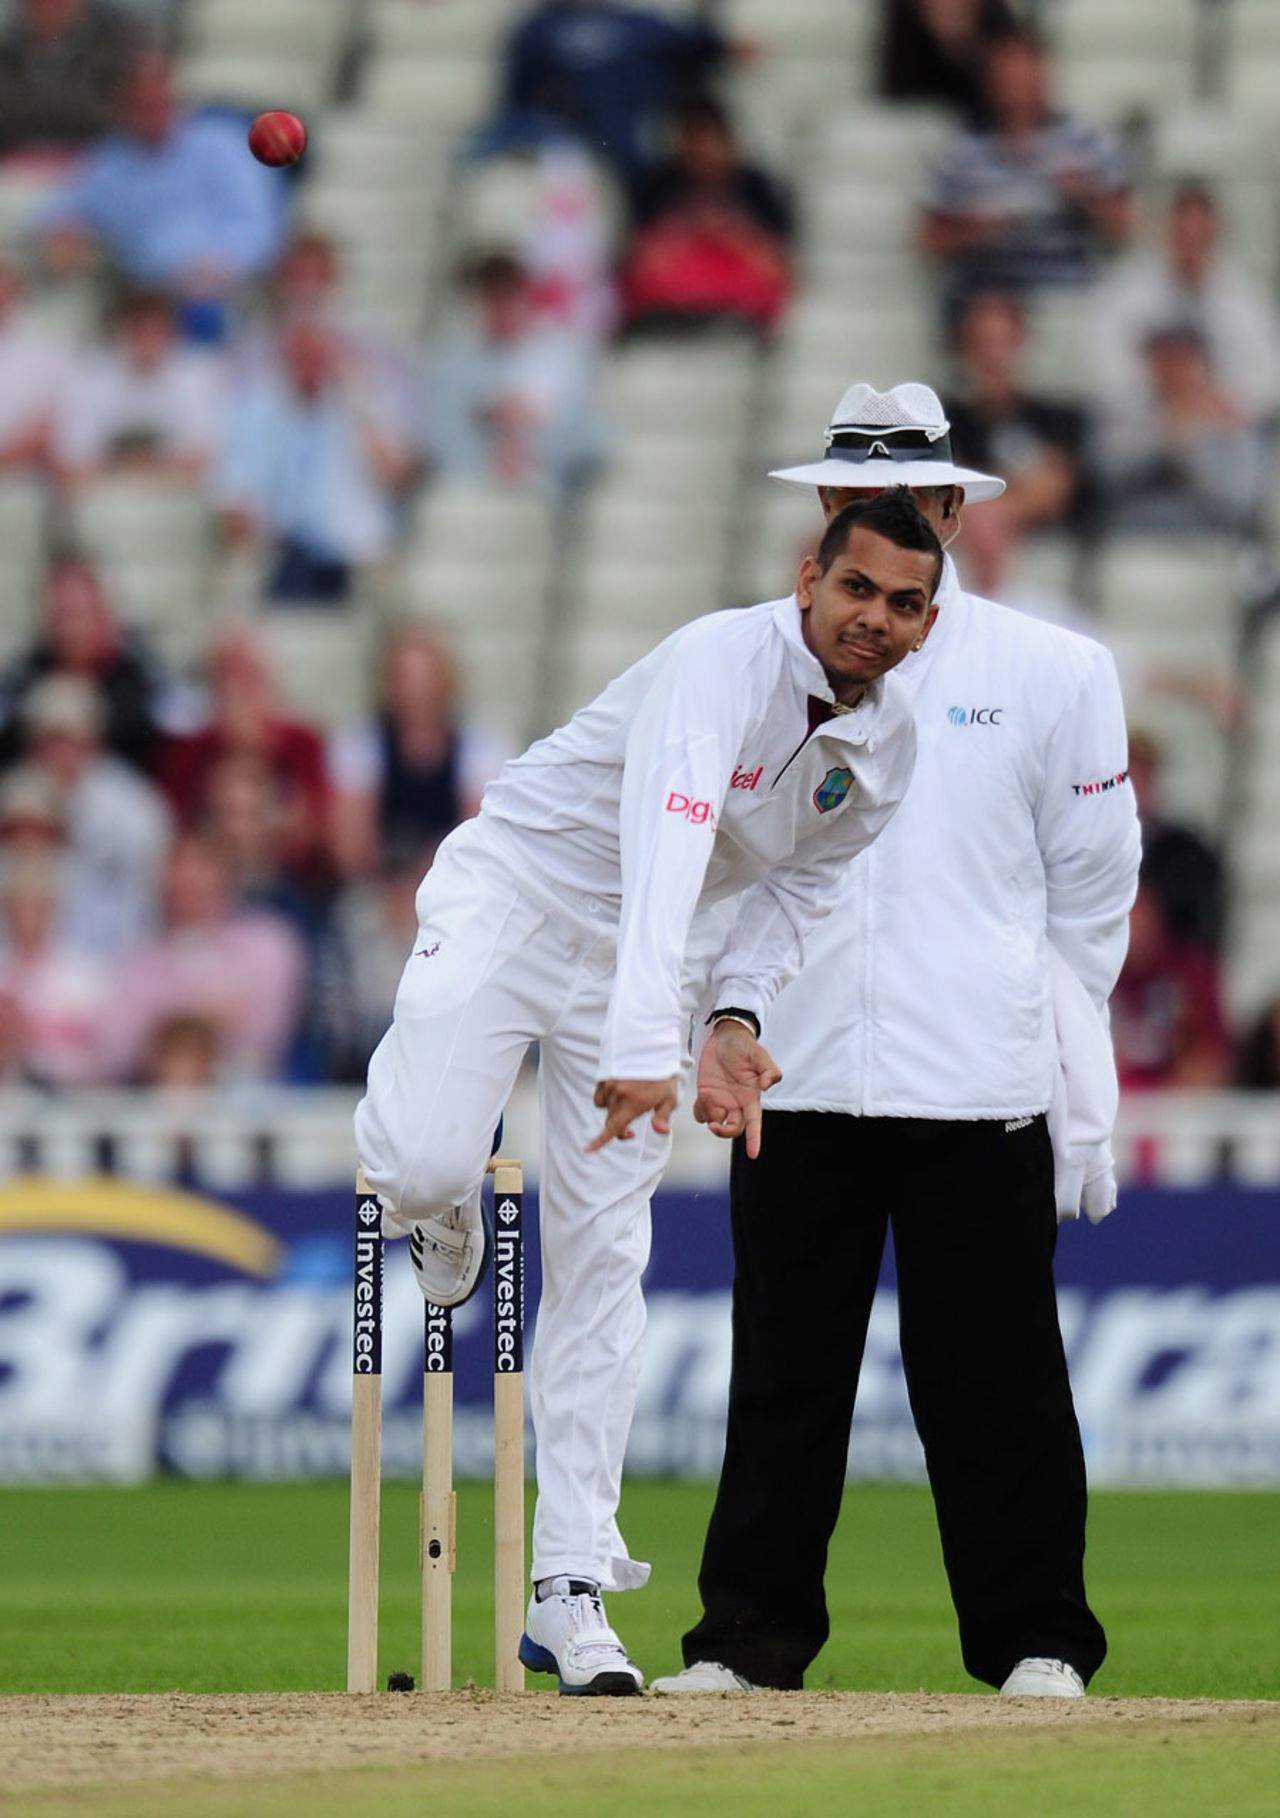 Sunil Narine bowled his first deliveries in Test cricket, England v West Indies, 3rd Test, Edgbaston, 4th day, June 10, 2012